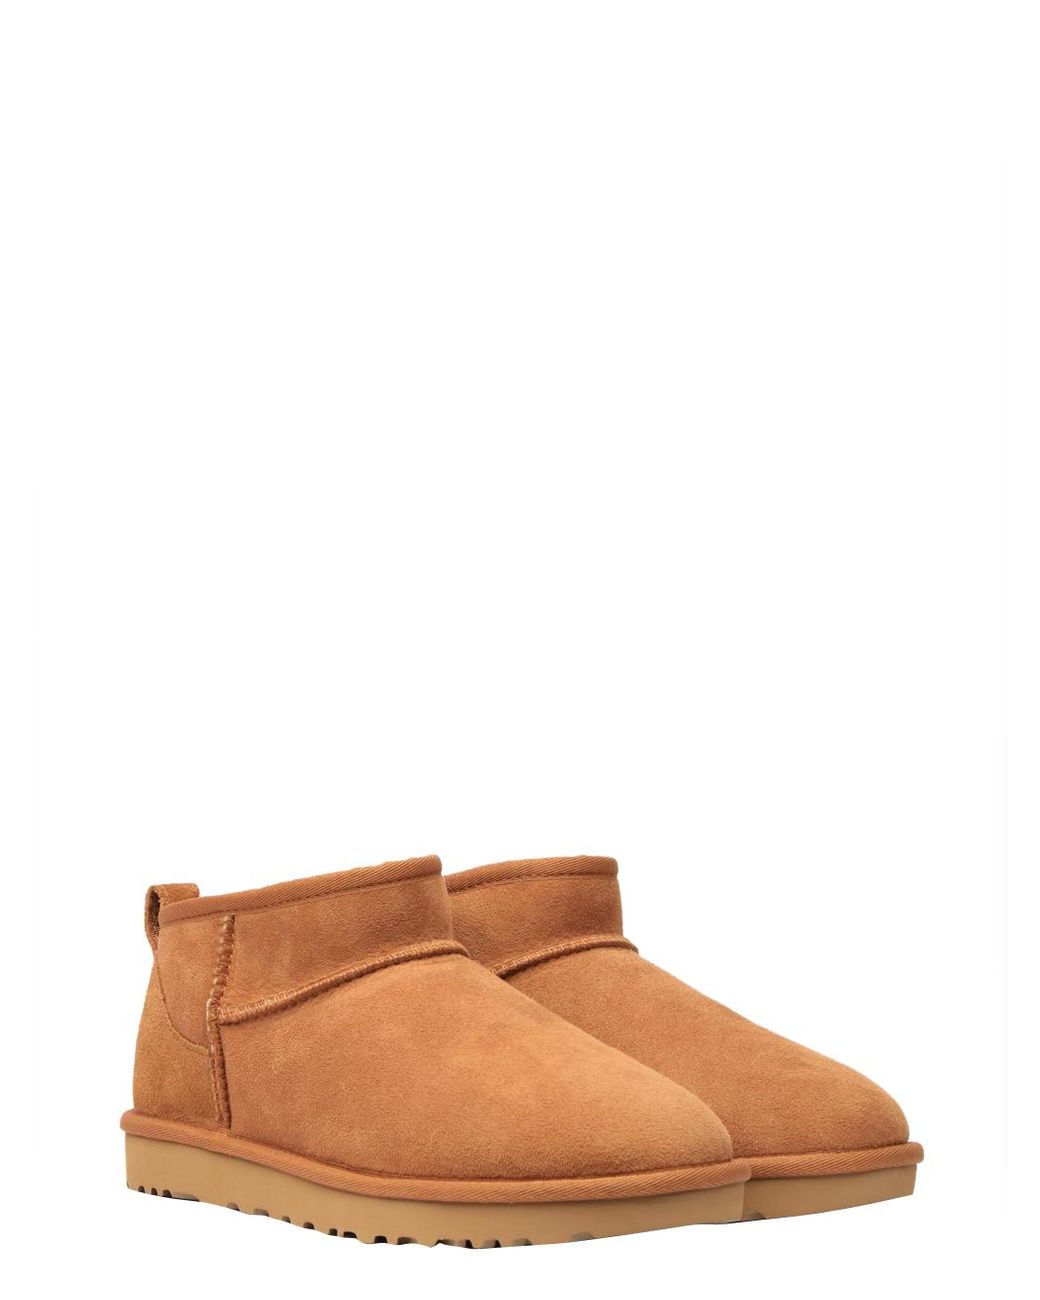 UGG Australia Boots Camel in Brown | Lyst